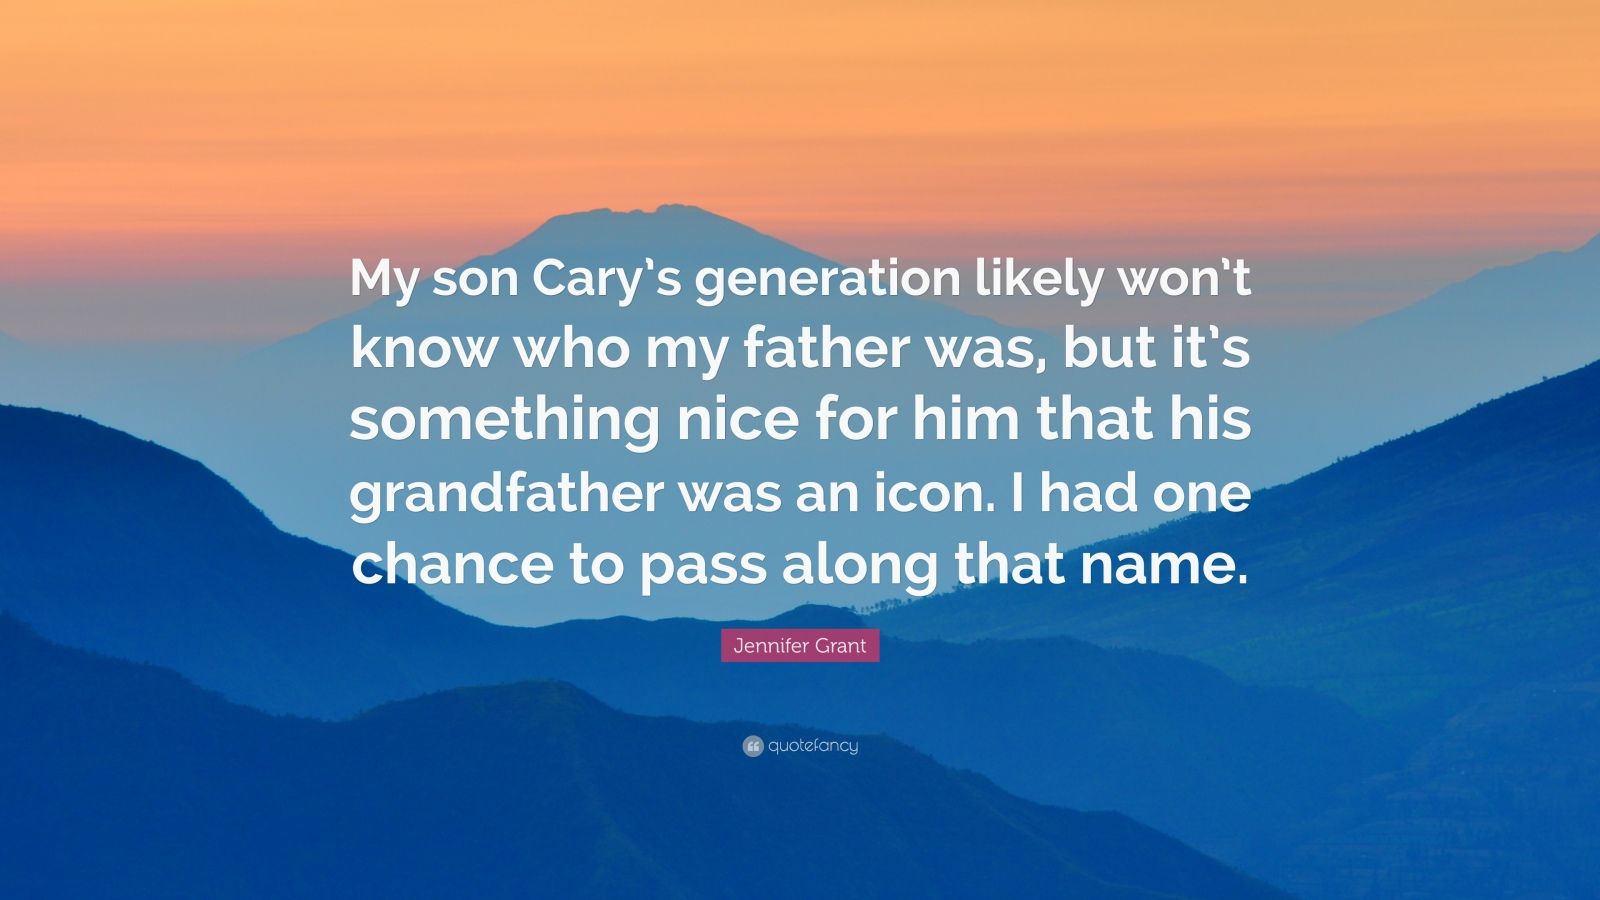 https://quotefancy.com/media/wallpaper/1600x900/1372825-Jennifer-Grant-Quote-My-son-Cary-s-generation-likely-won-t-know.jpg